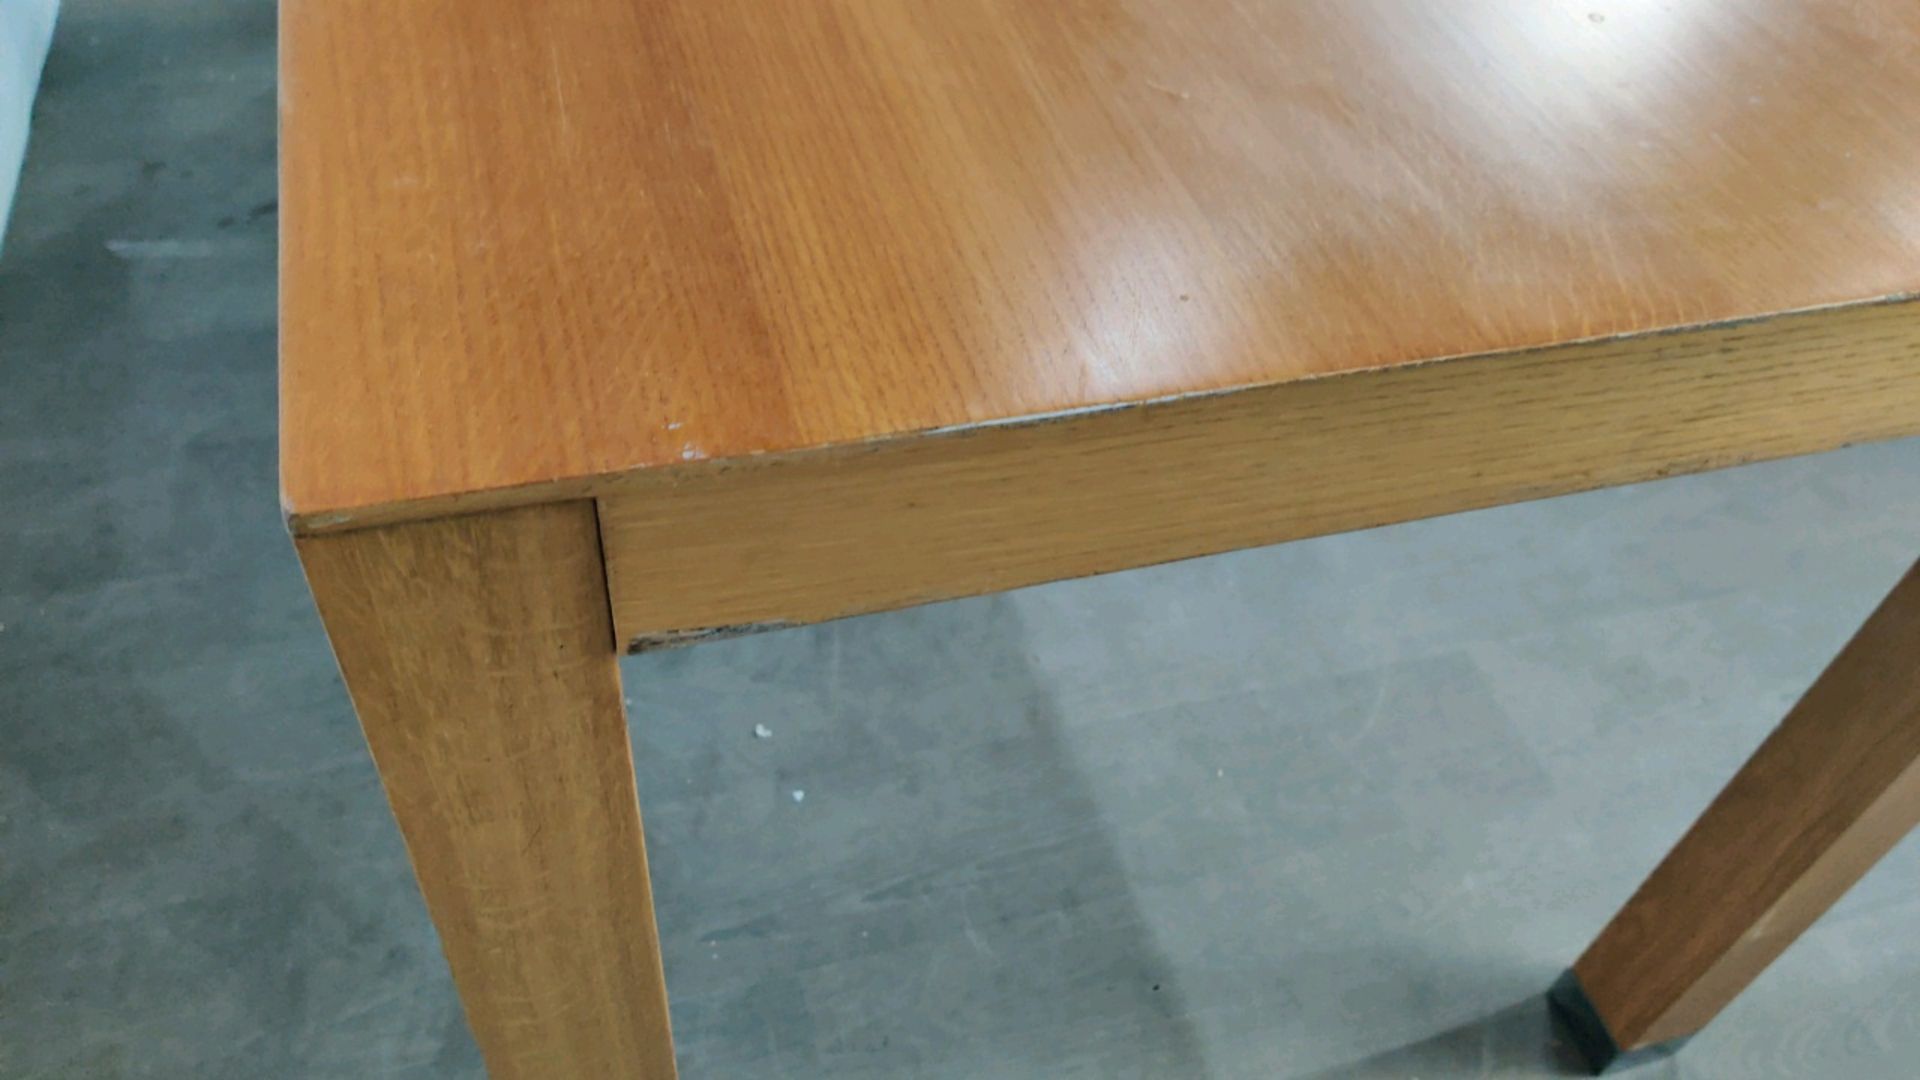 Large Wooden Table With Chromed Feet - Image 3 of 5